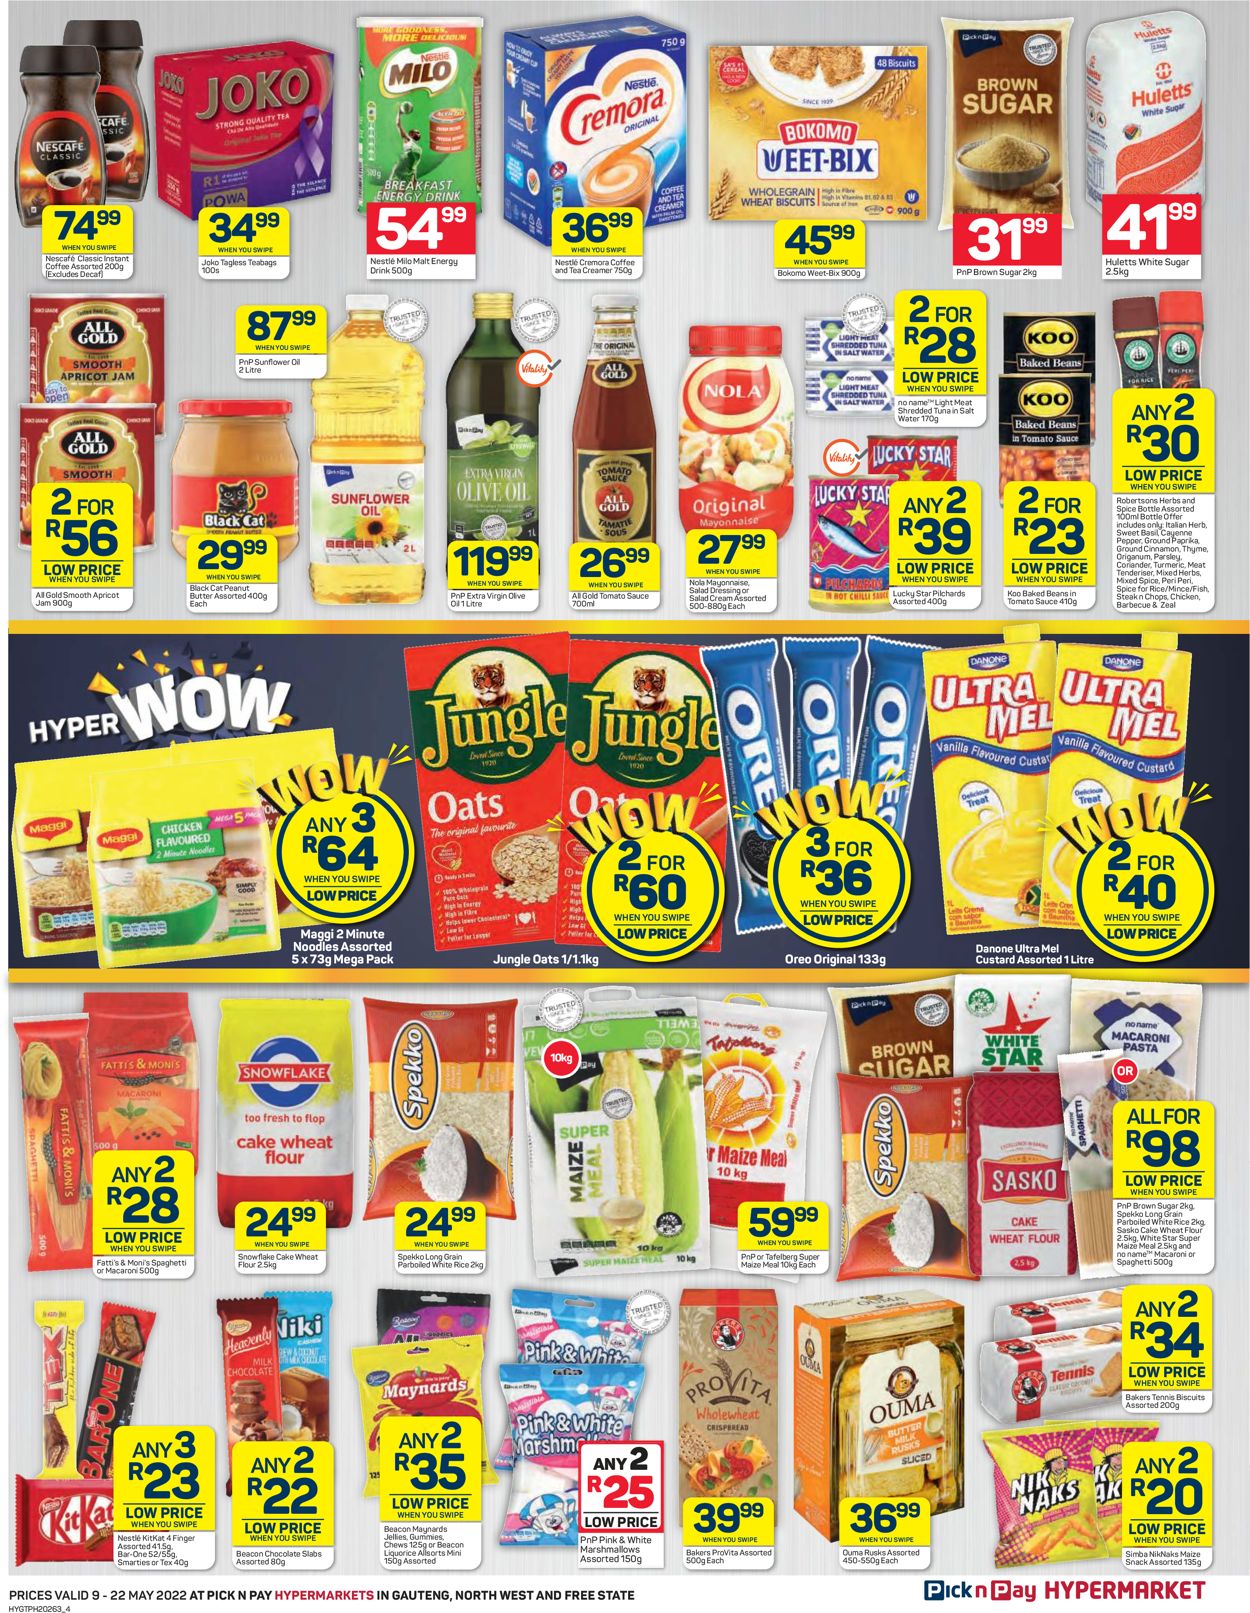 Pick n Pay Catalogue - 2022/05/09-2022/05/22 (Page 4)